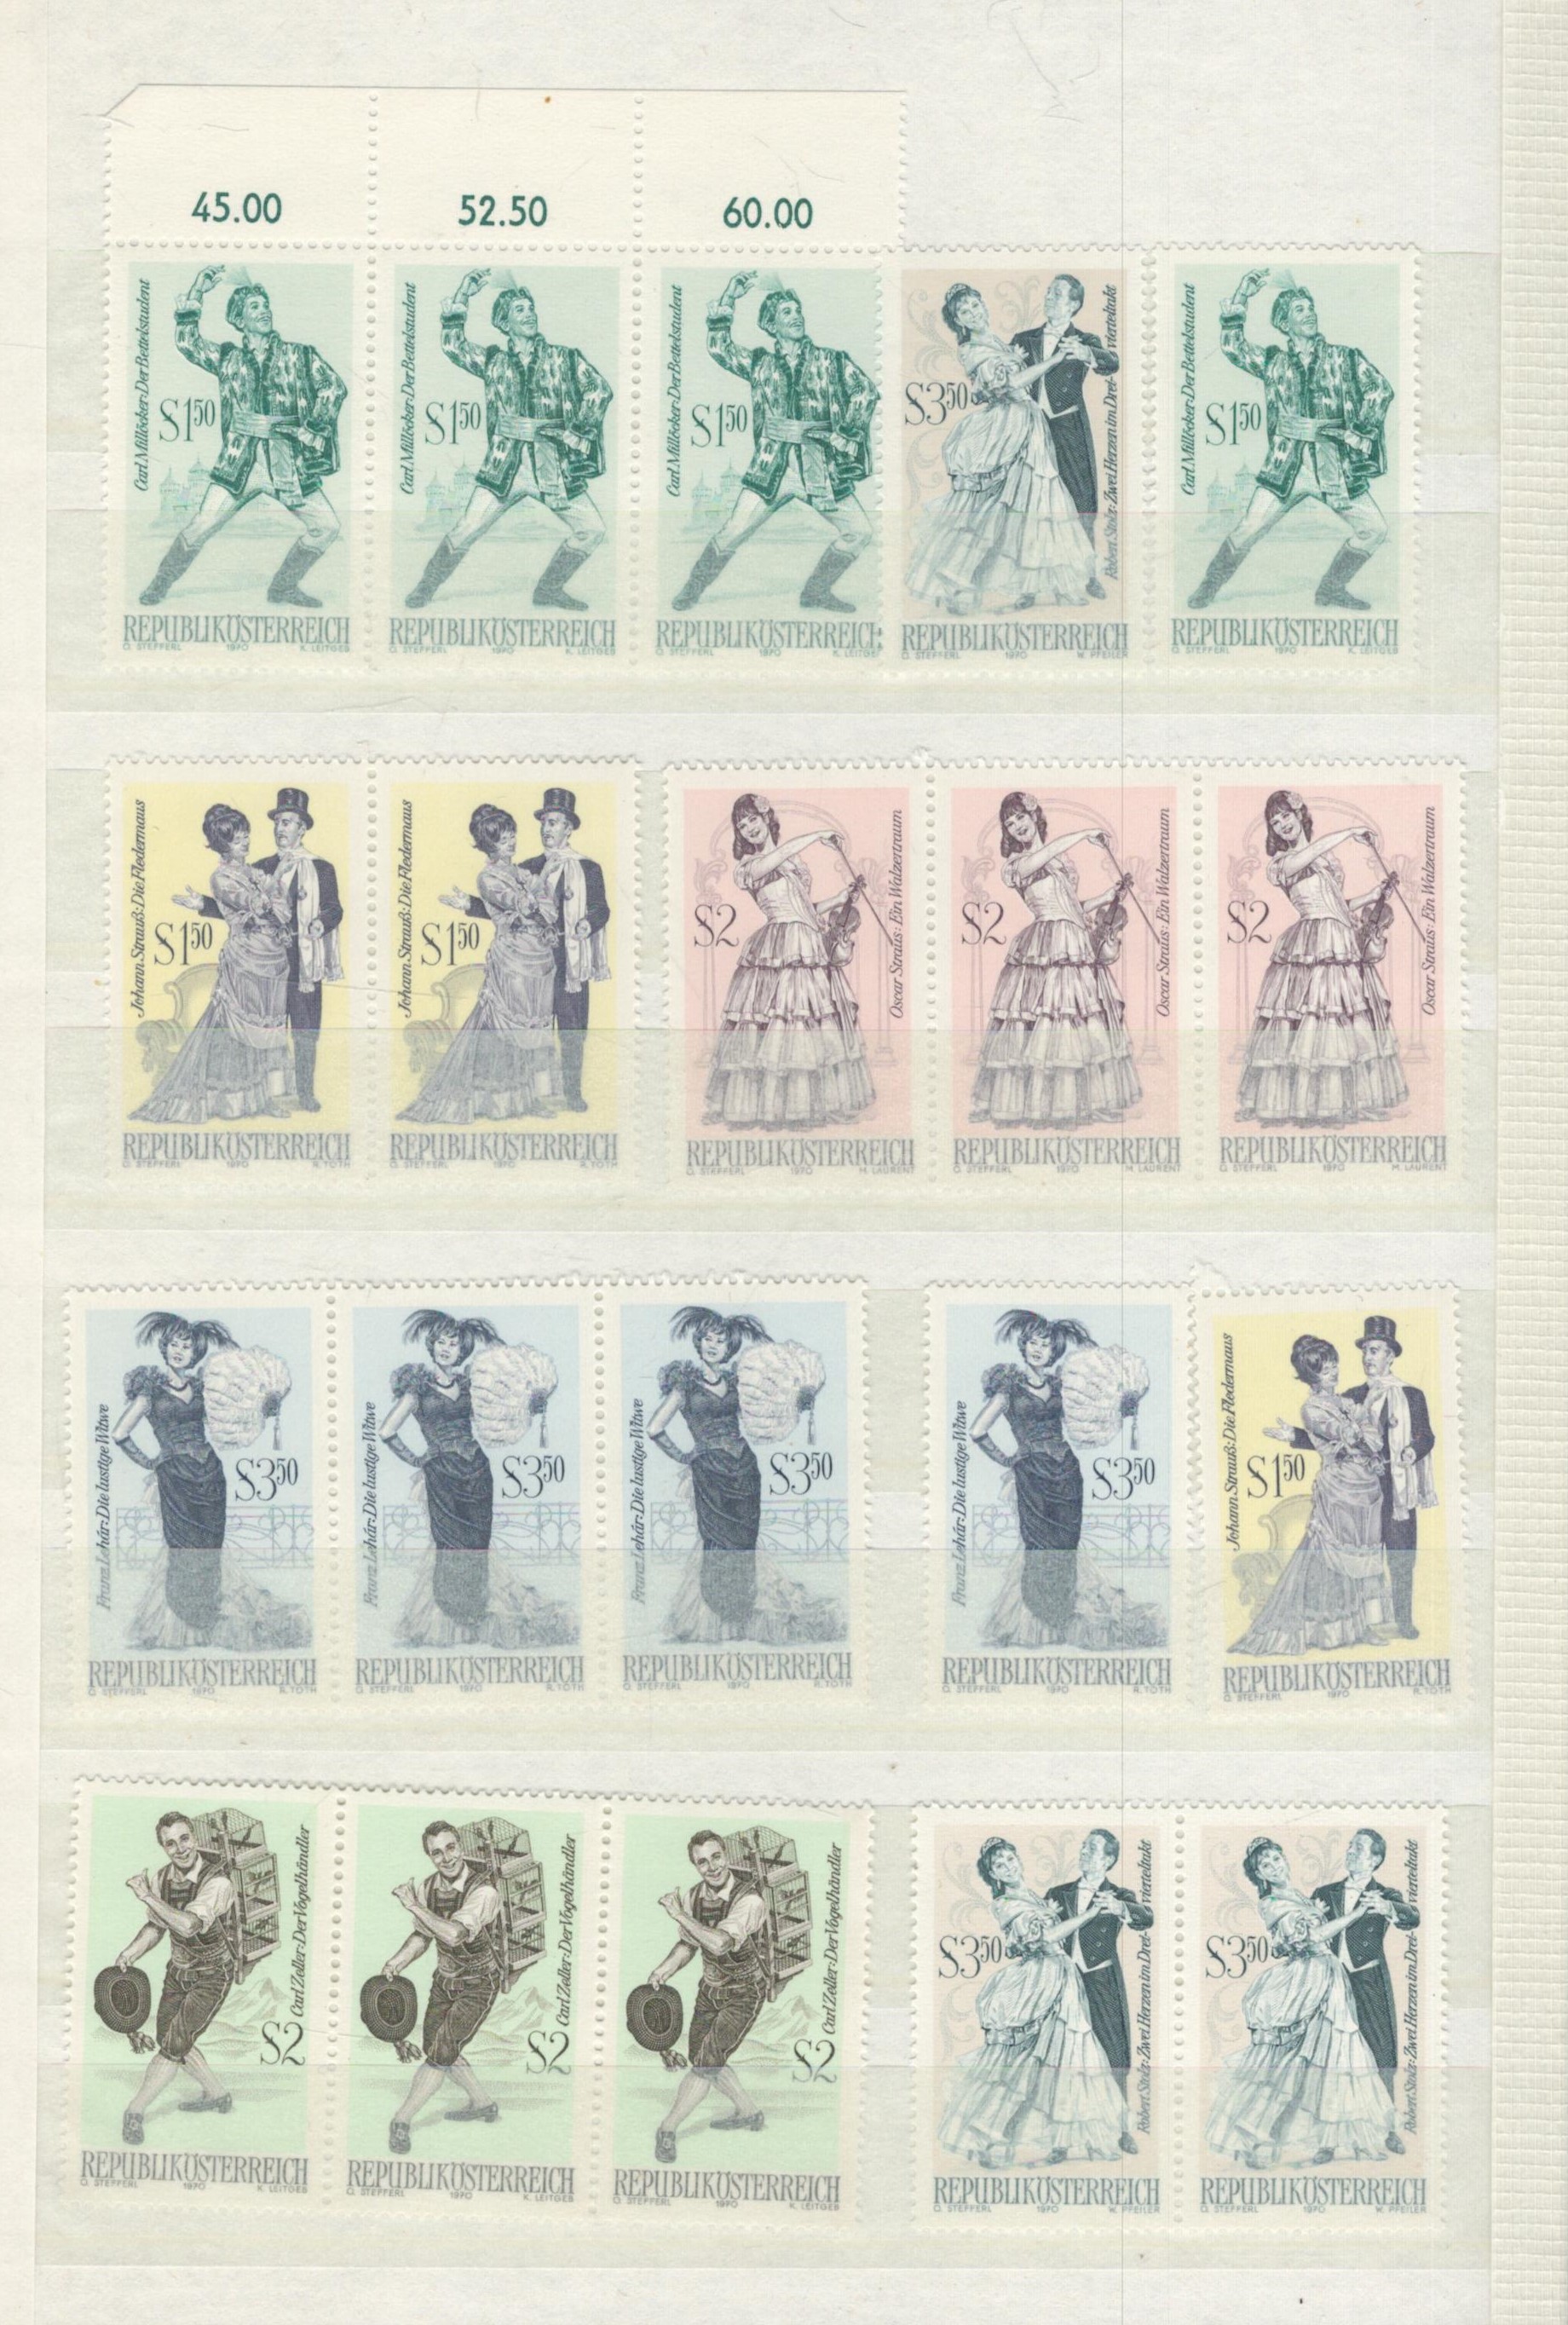 Austria Mint & used Stamps ina Lidner Stockbook with 17 Hardback Pages and 8 Rows each side - Image 3 of 4